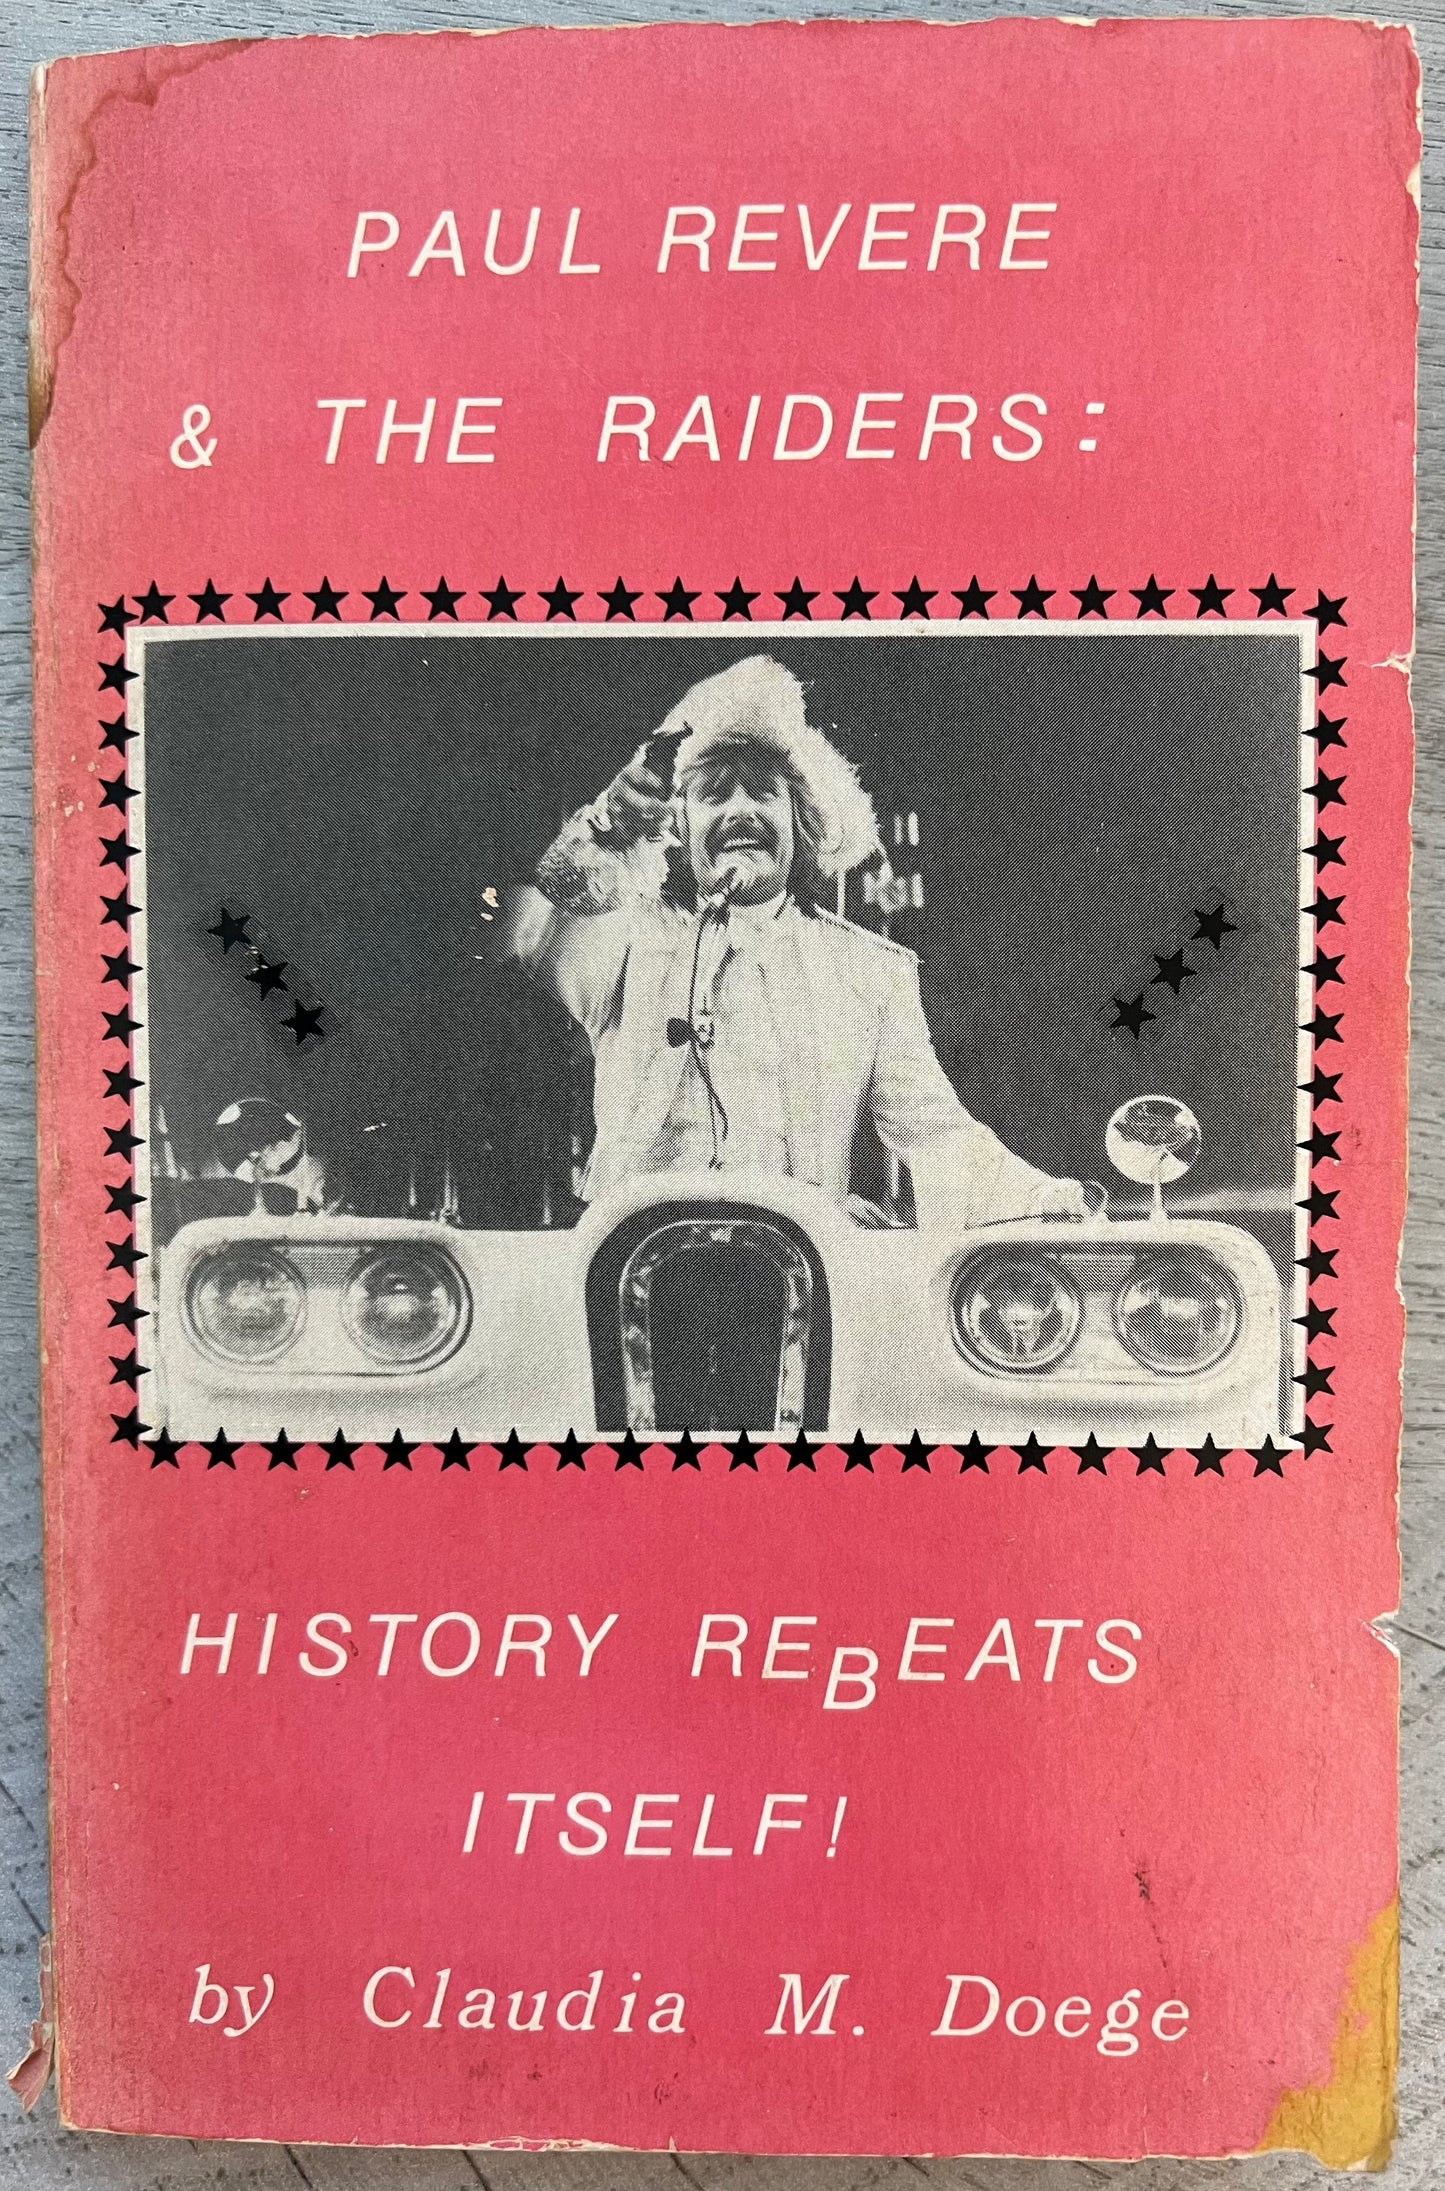 Mark's Personal Copy - RARE History Rebeats Itself PR-Authorized Raiders Bio Book + 8 Revere Deposition Pages - Personally Autographed to YOU by Mark